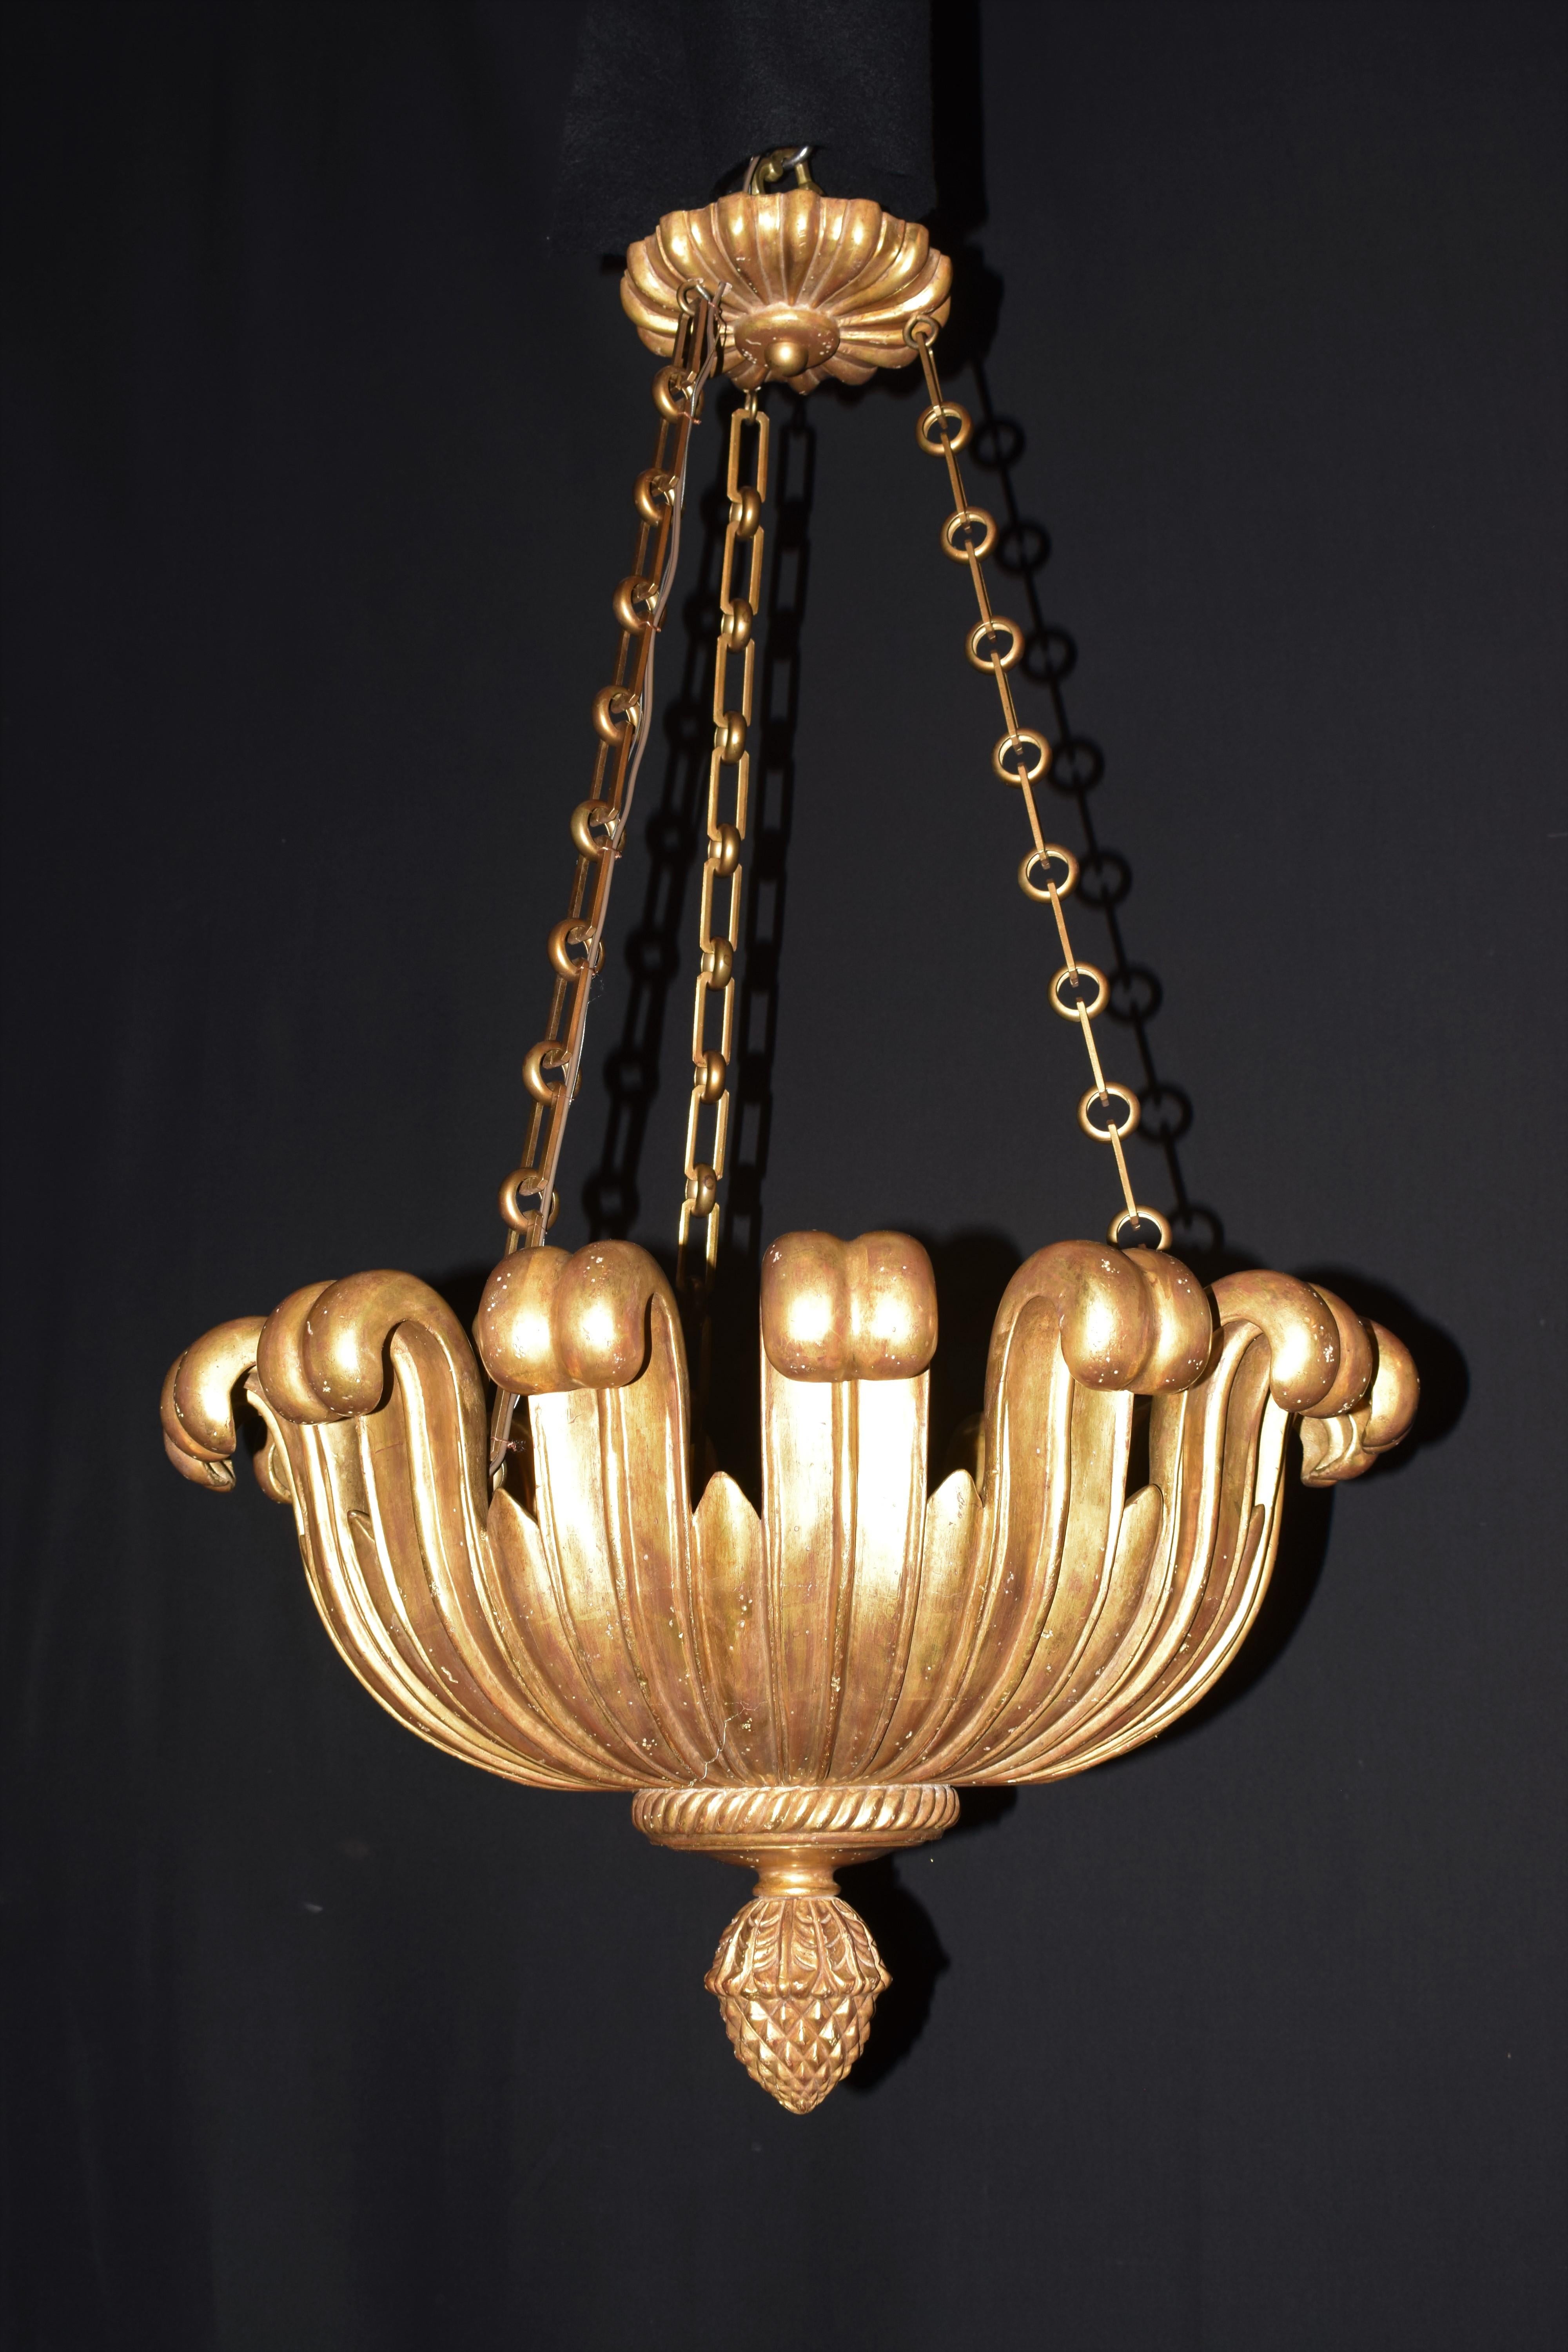 A very elegant & decorative neoclassical bronze & giltwood pendant.
Europe Circa, 1990. 3 lights.
Dimensions: Height 40